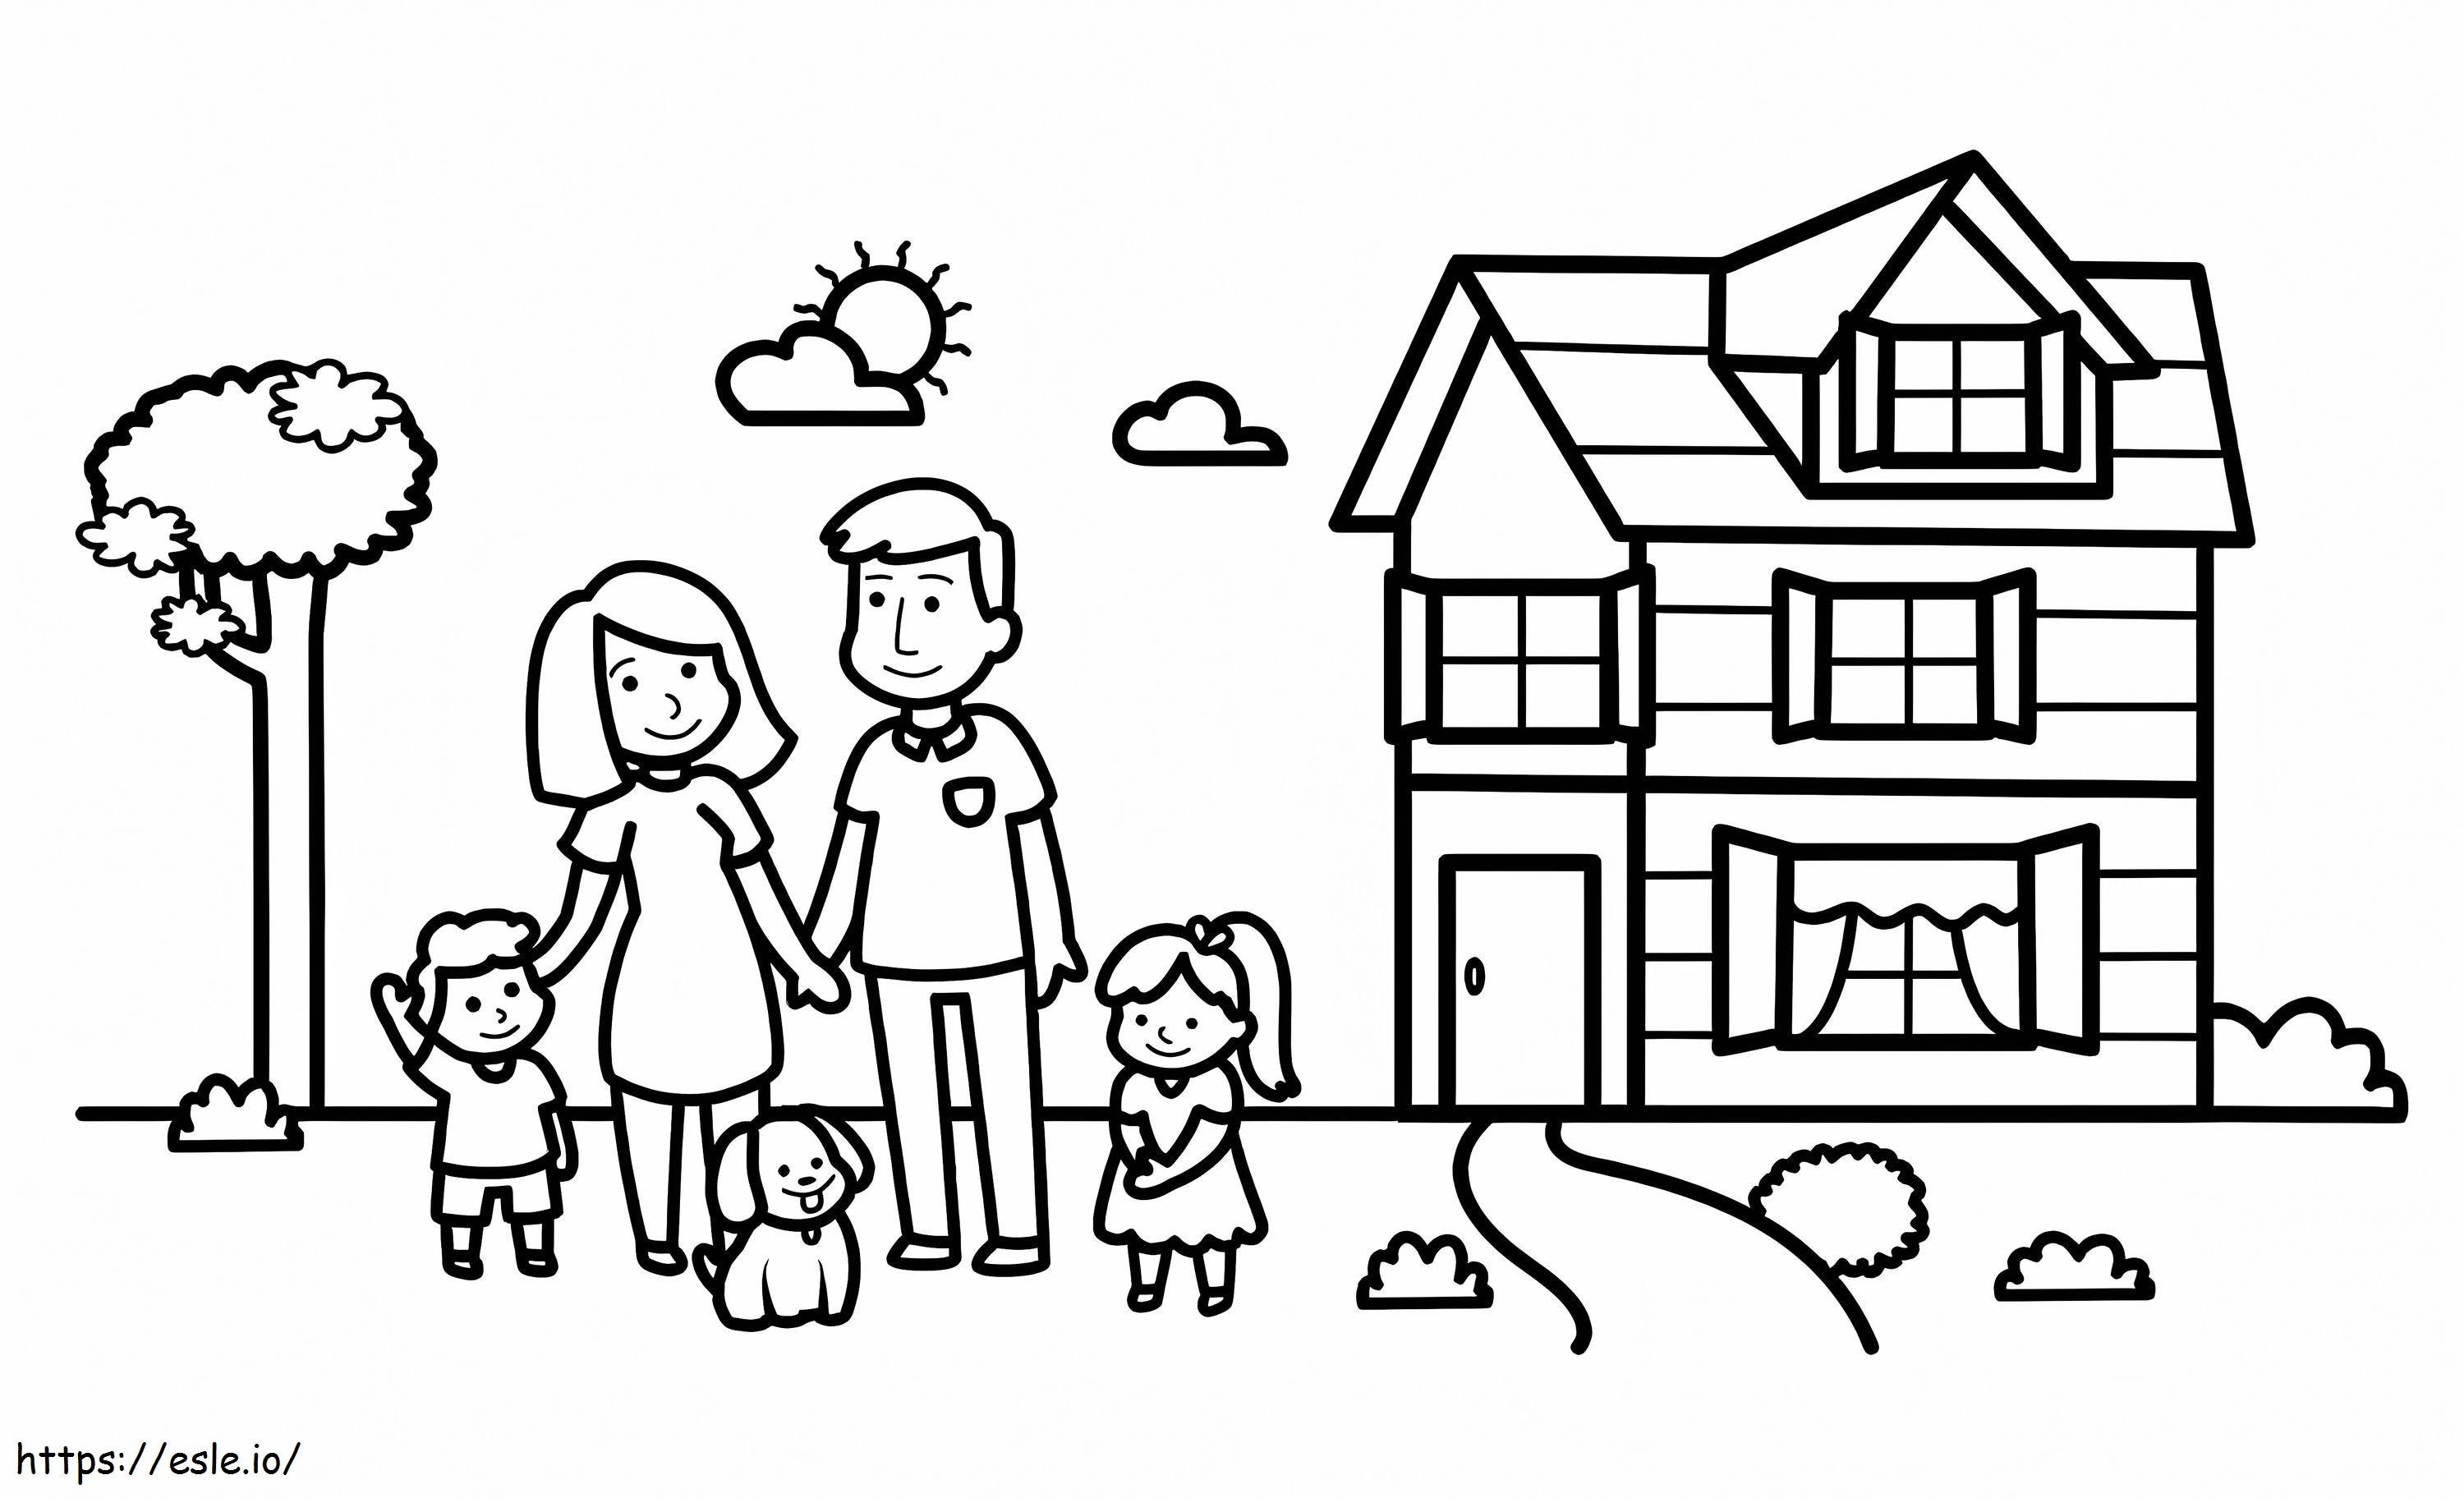 Cute Family With House coloring page